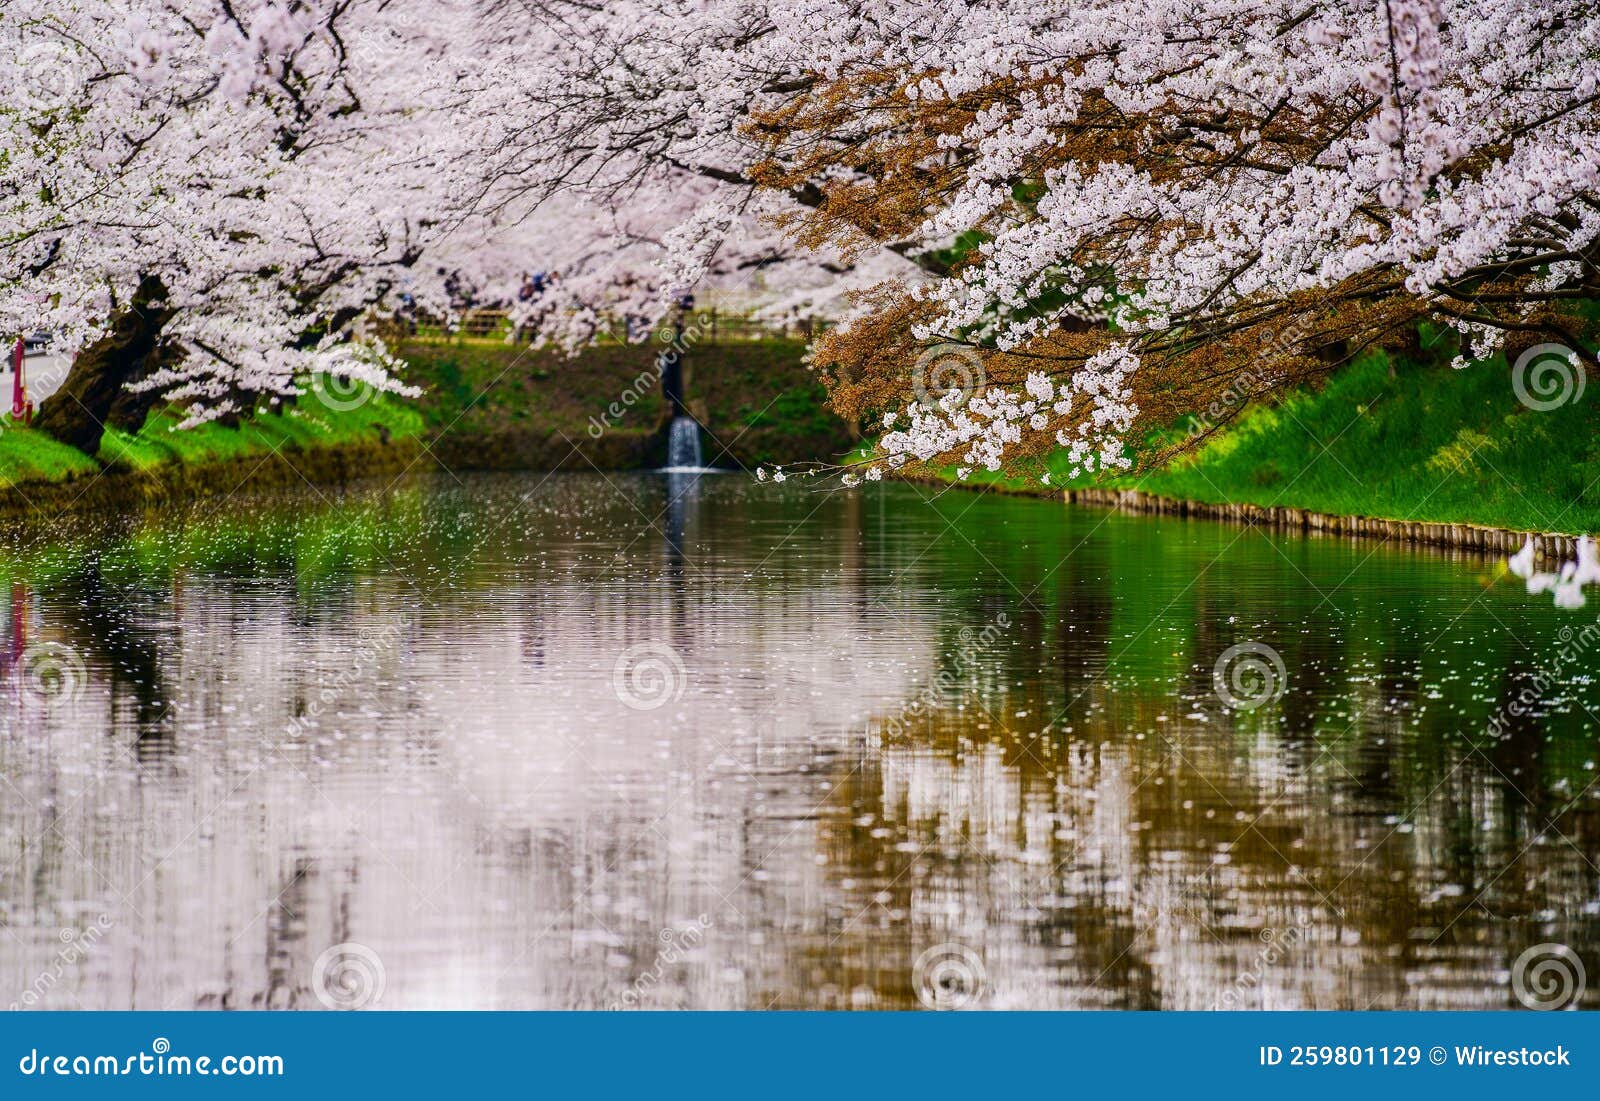 Aerial View of Lake with Waterfall Surrounded by Blooming Trees Stock ...